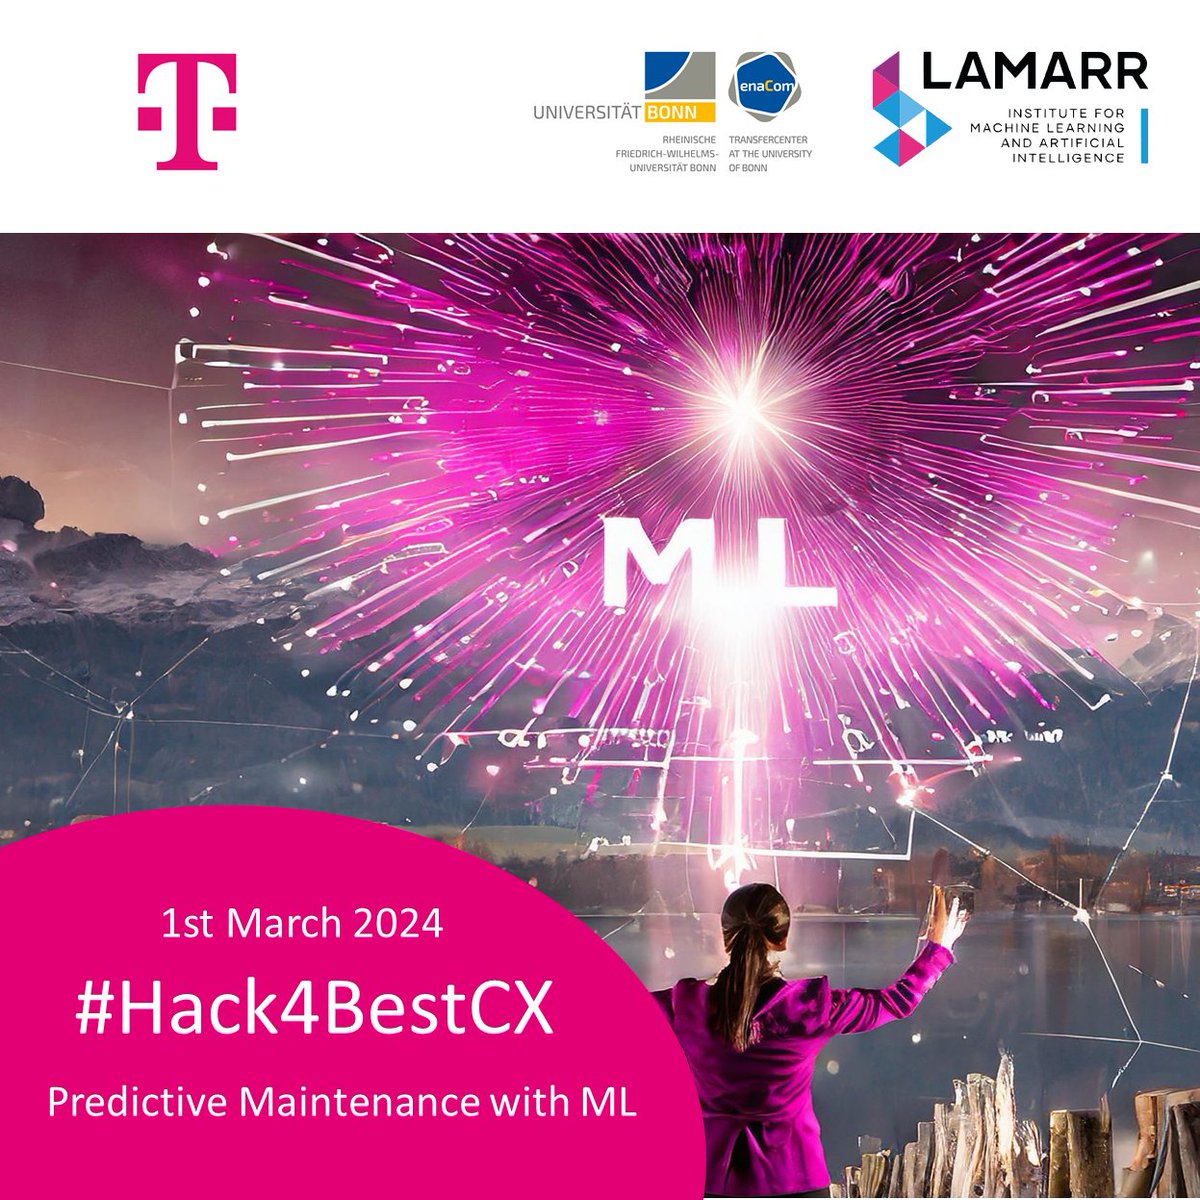 Only 10 days left to register for the #Hack4BestCX #Hackathon with @deutschetelekom to improve their #CustomerExperience! Register until Feb. 25 at ➡️ lamarr-institute.org/de/events/❗ 📅 March 1, 2024 📍 Telekom Campus, Bonn